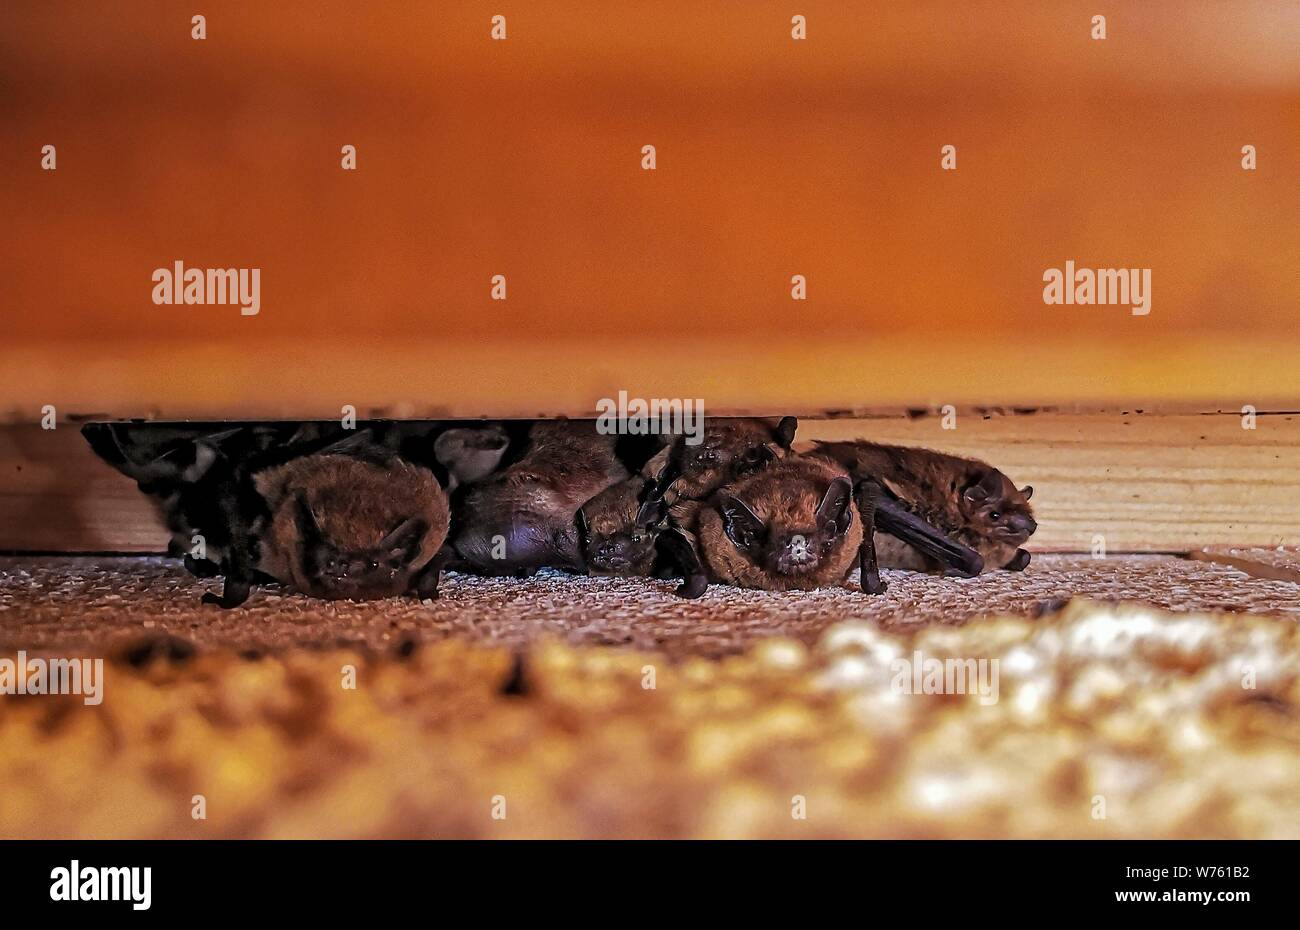 Common Pipistrelle Bat (Pipistrellus pipistrellus), maternity colonie with females and young under wooden beam of house, Hesse, Germany | usage worldwide Stock Photo